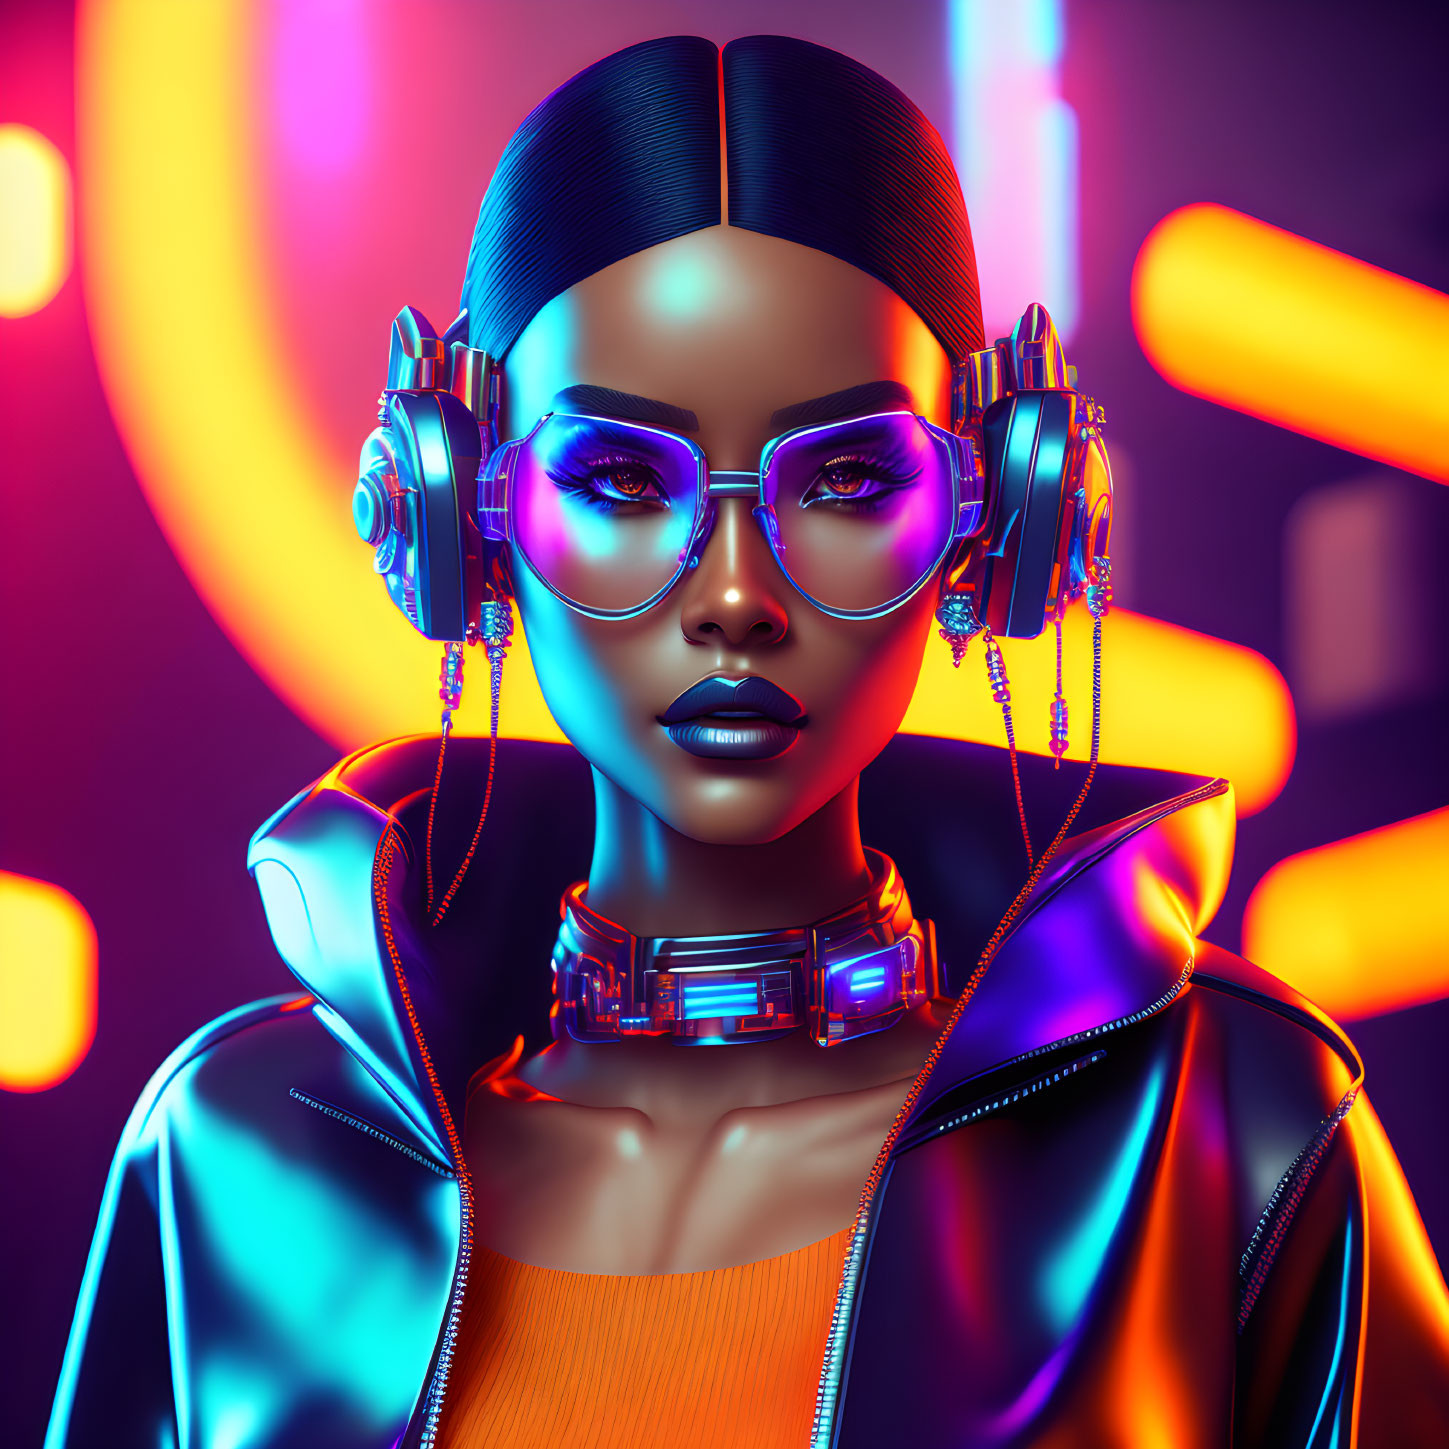 Futuristic woman with glowing lights, headphones, shades, and choker necklace